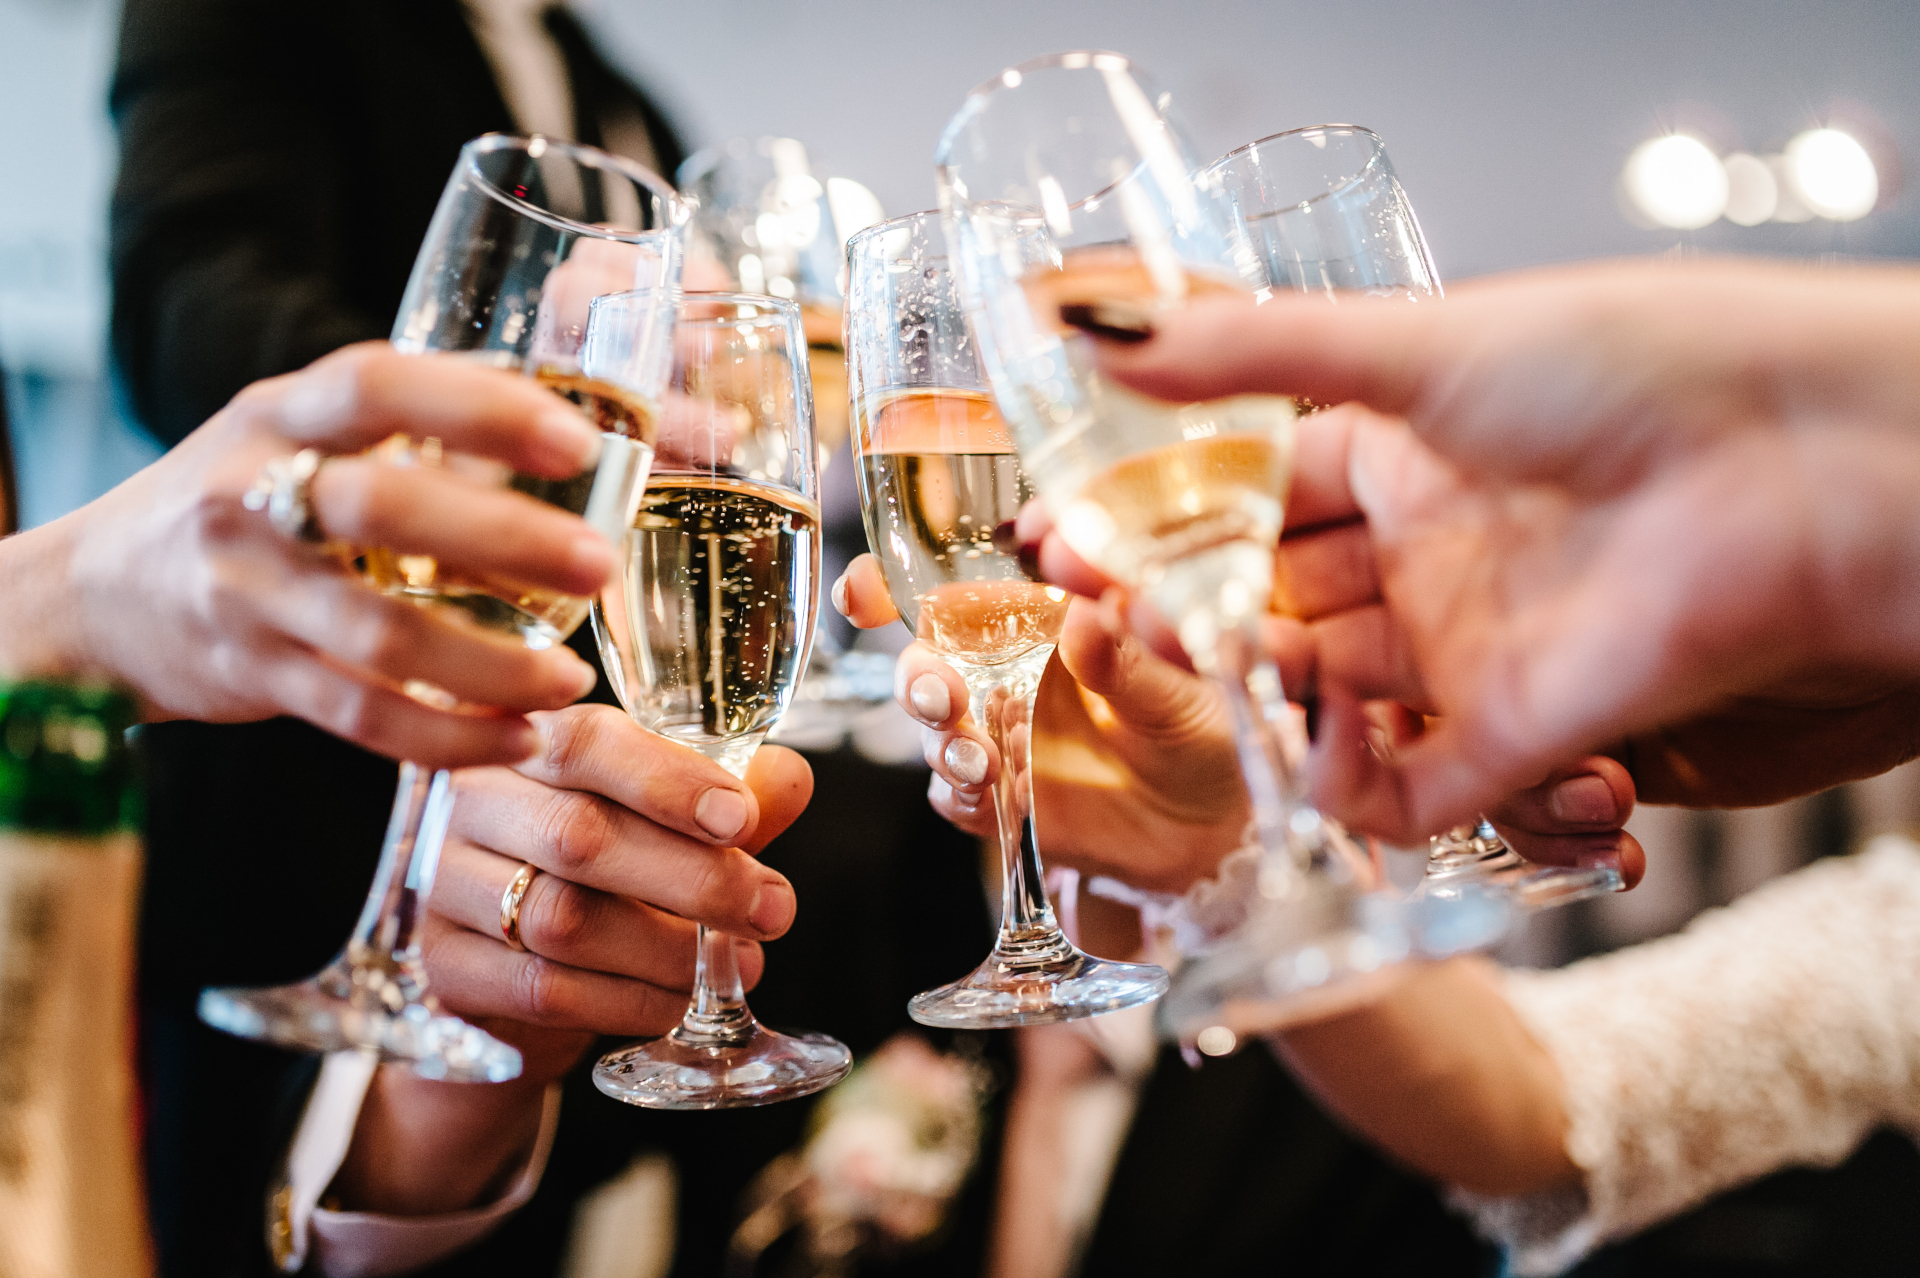 Guests drinking champagne at a lunch event